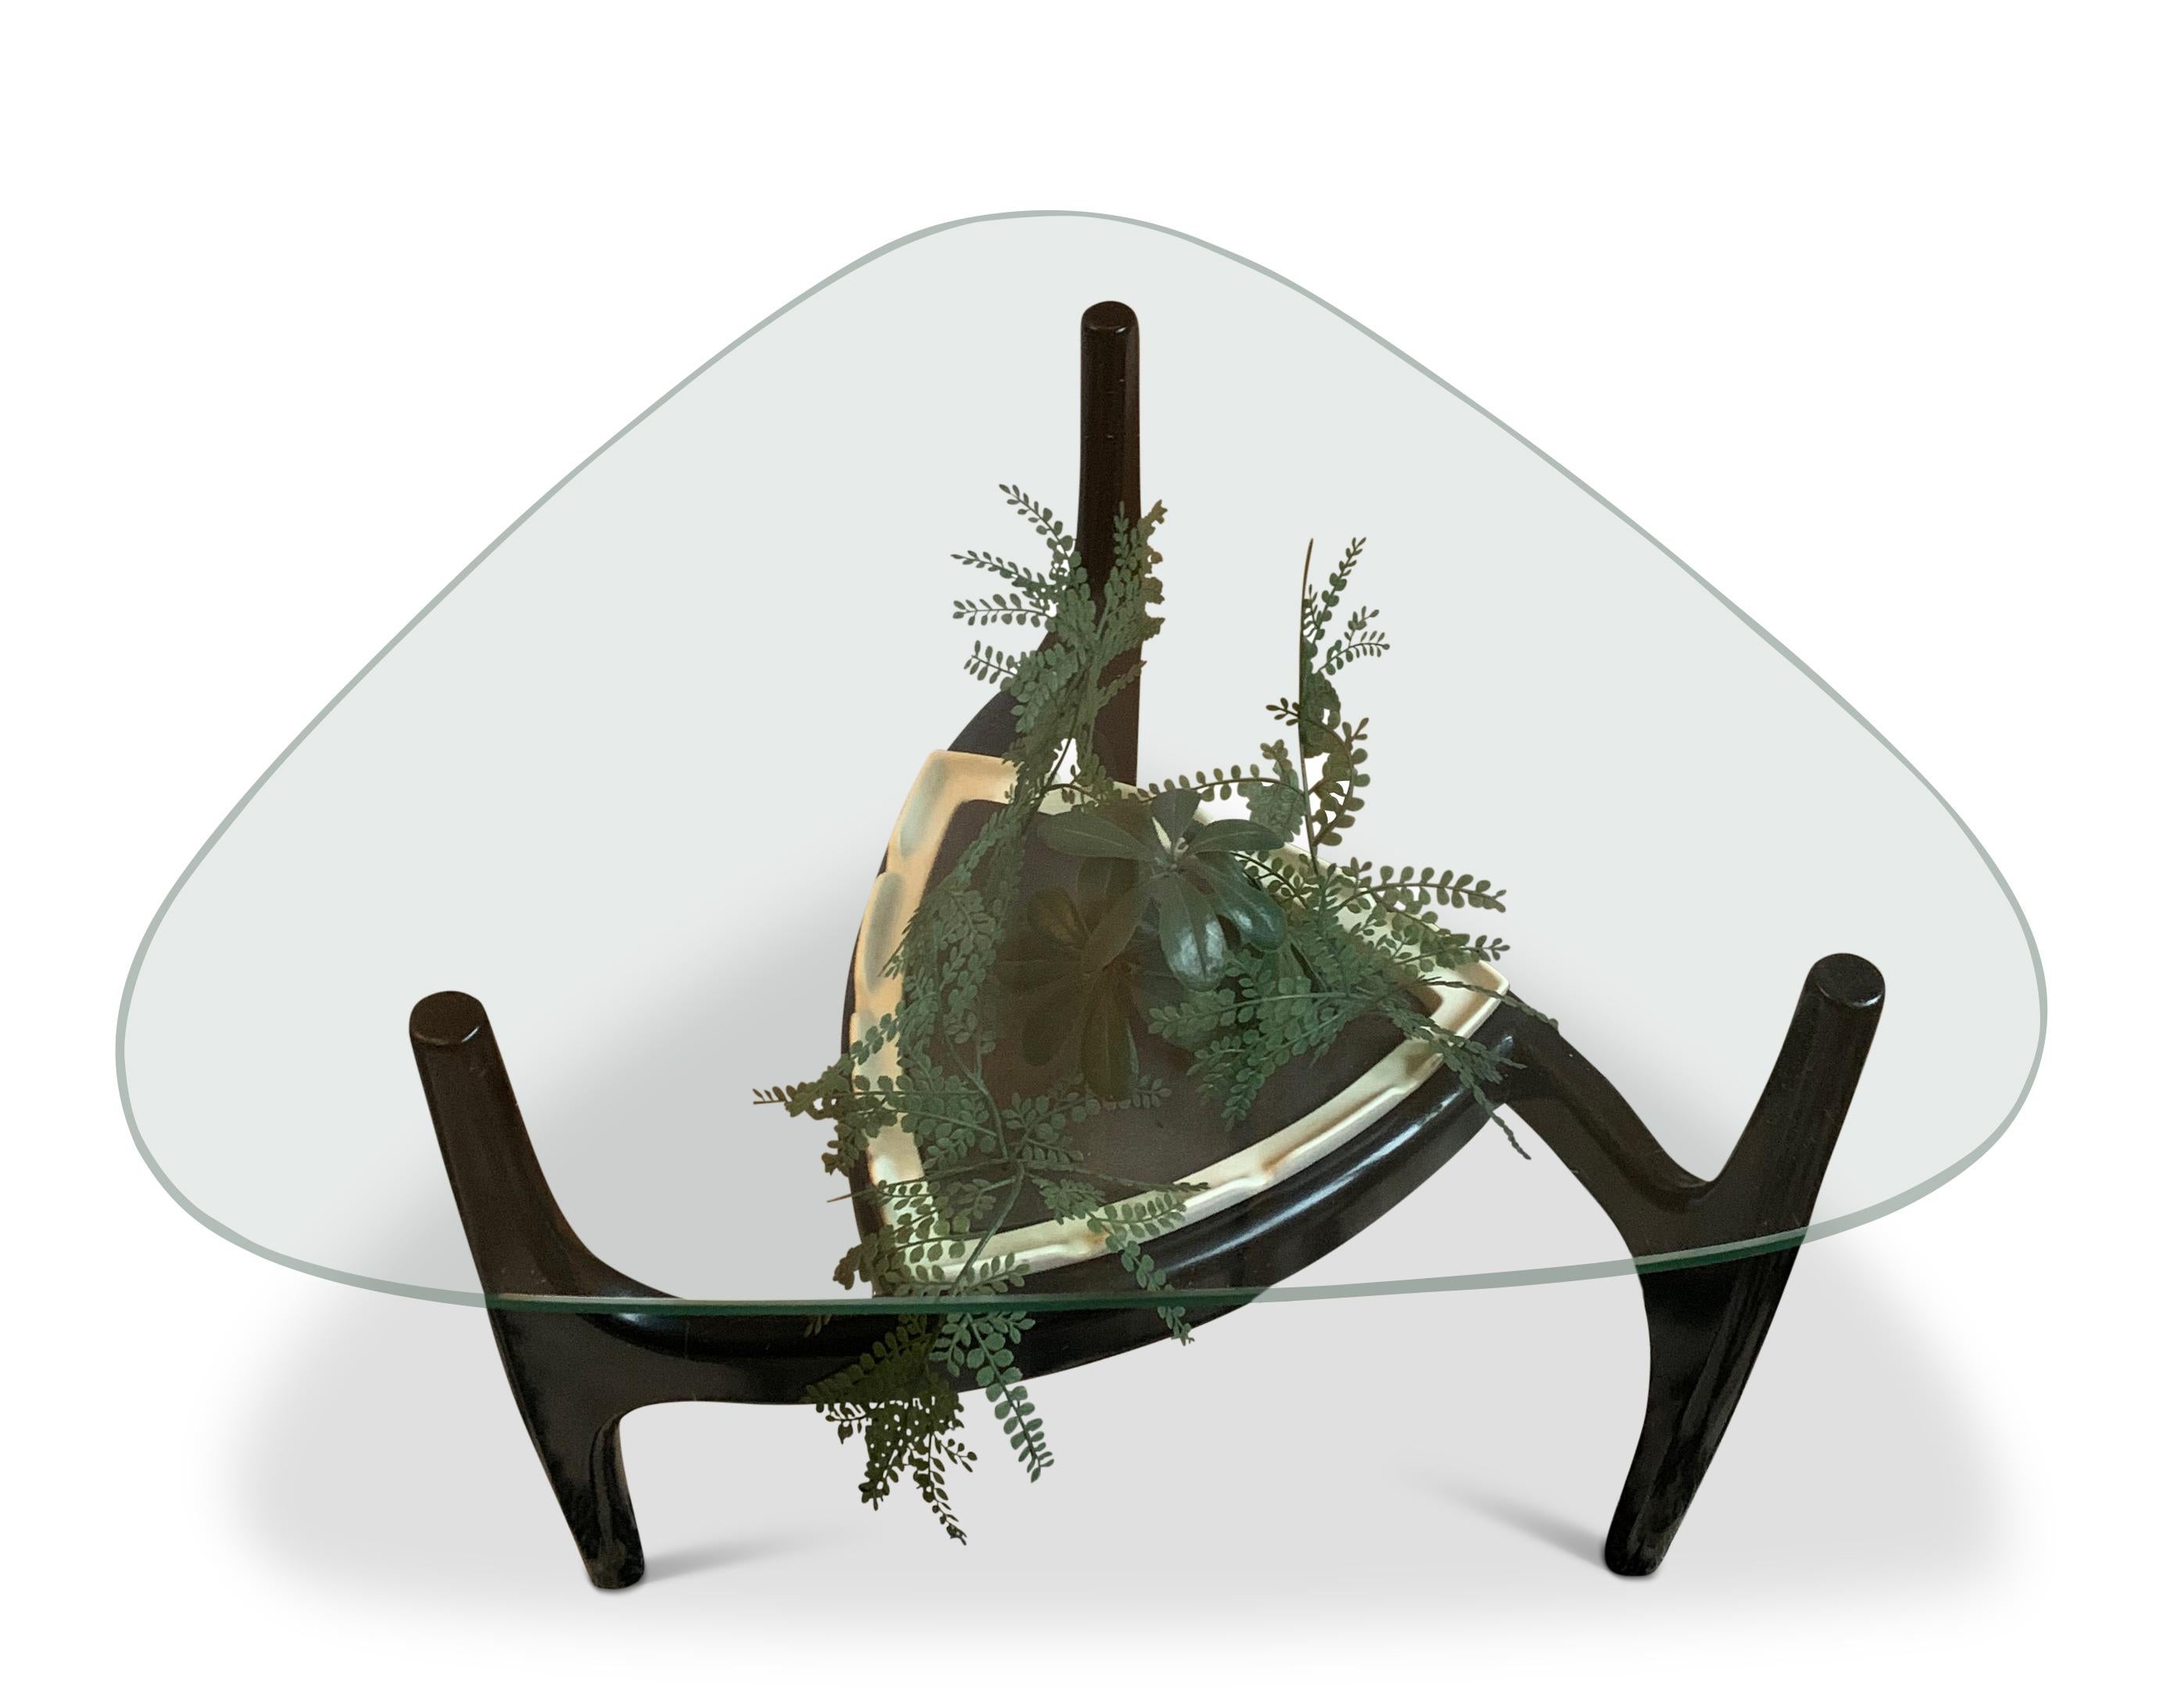 Adrian Pearsall midcentury amorphic glazed triform ebonised coffee table with tonk ceramic insert by Royal Haeger Made in the USA

Table features an amorphic, clear glass top panel sitting on a walnut frame. The frame features a curvilinear design